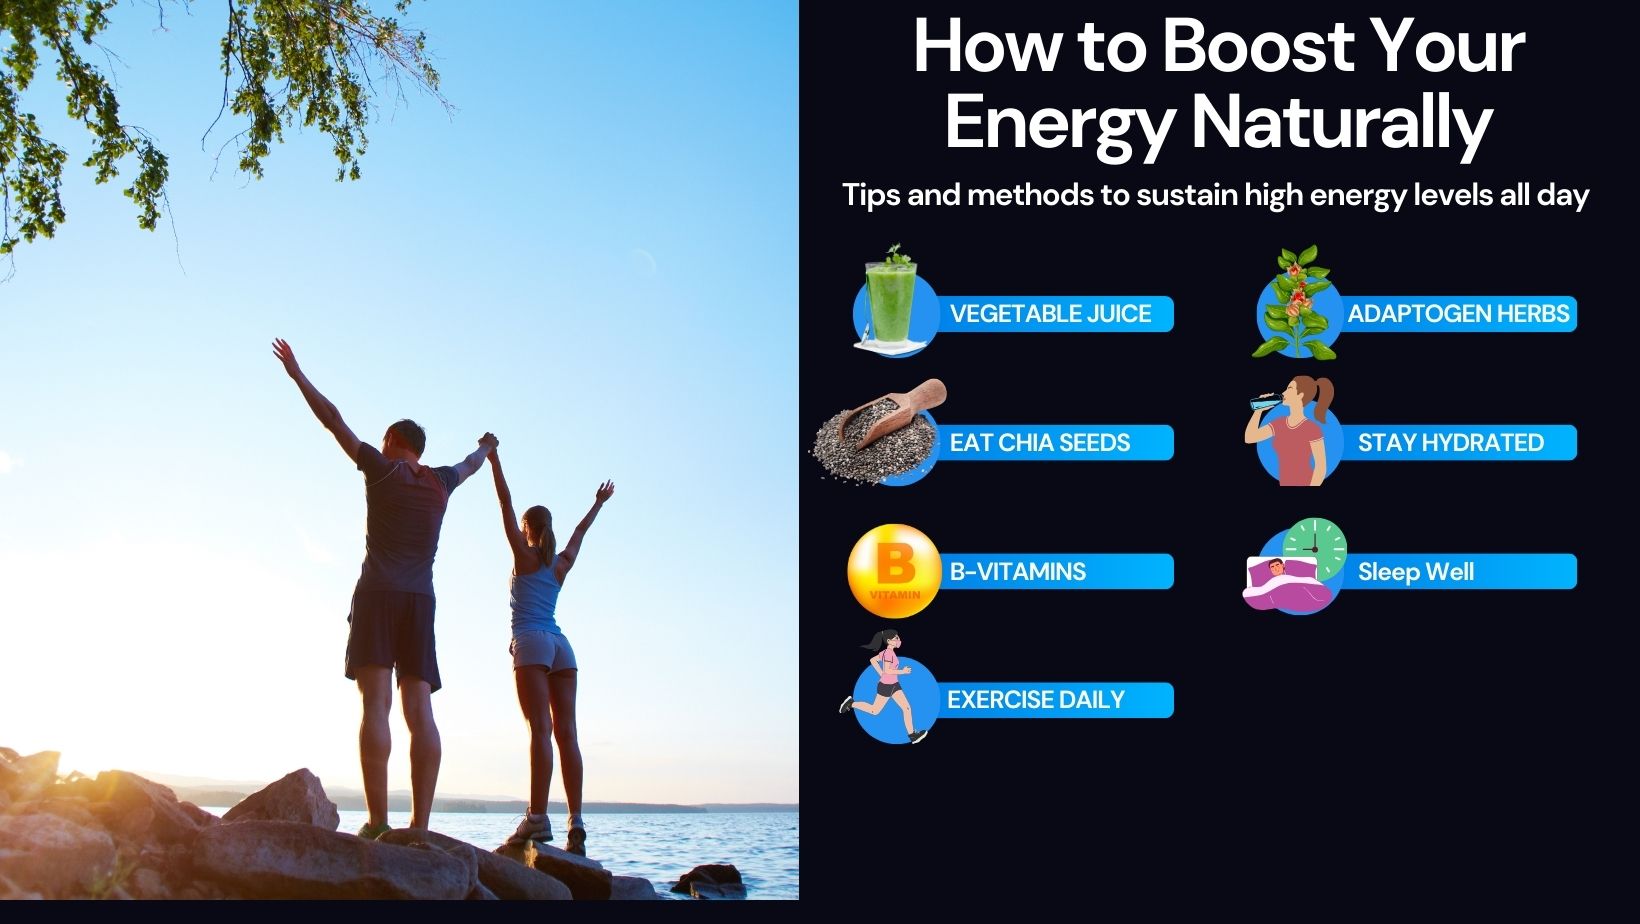 How to Boost Your Energy Naturally